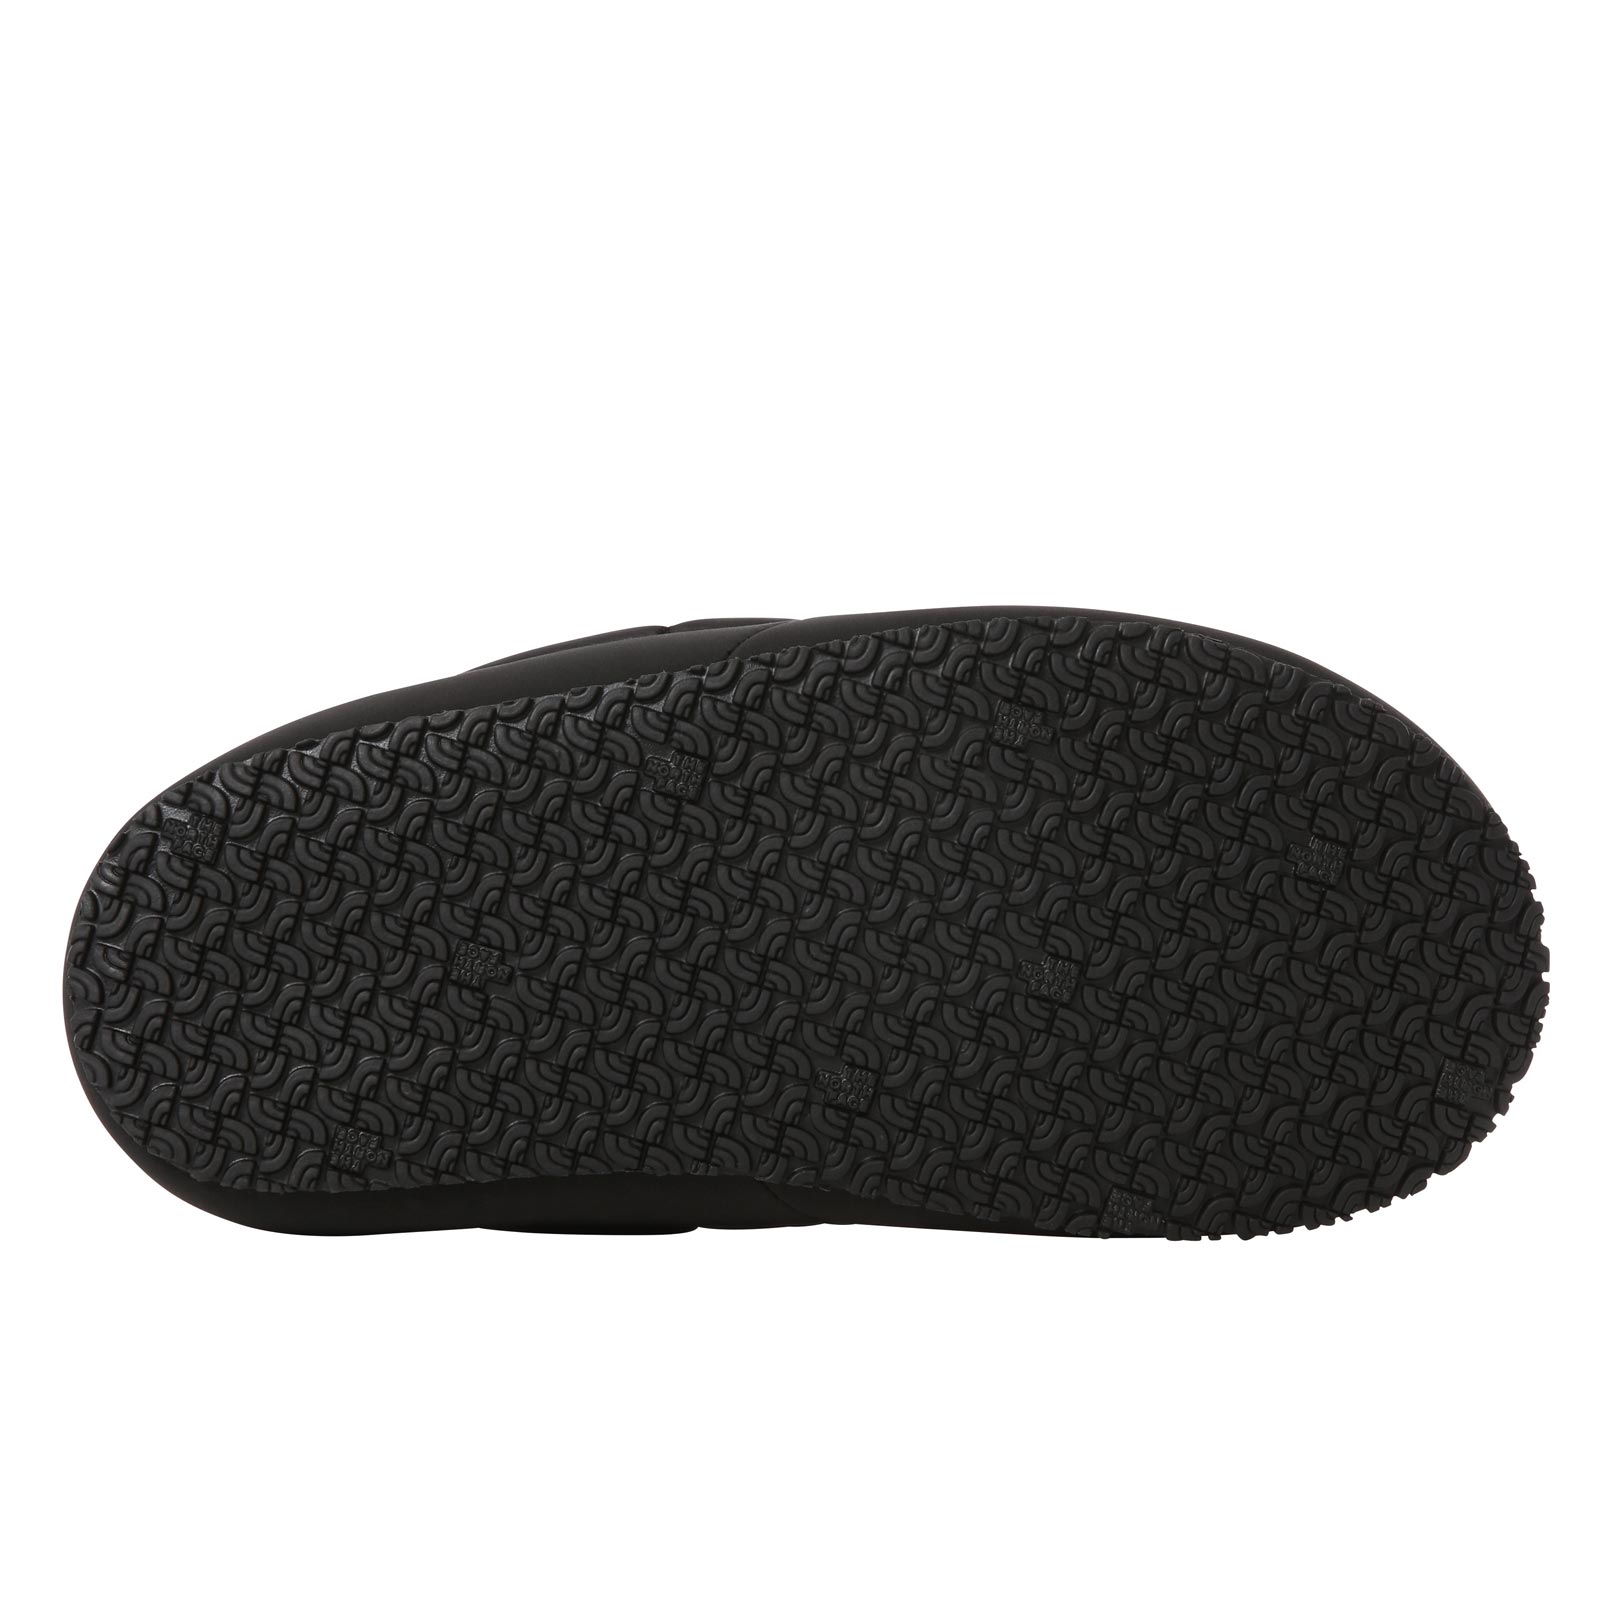 THE NORTH FACE THERMOBALL™ TRACTION JUNIOR KIDS WINTER SLIPPERS